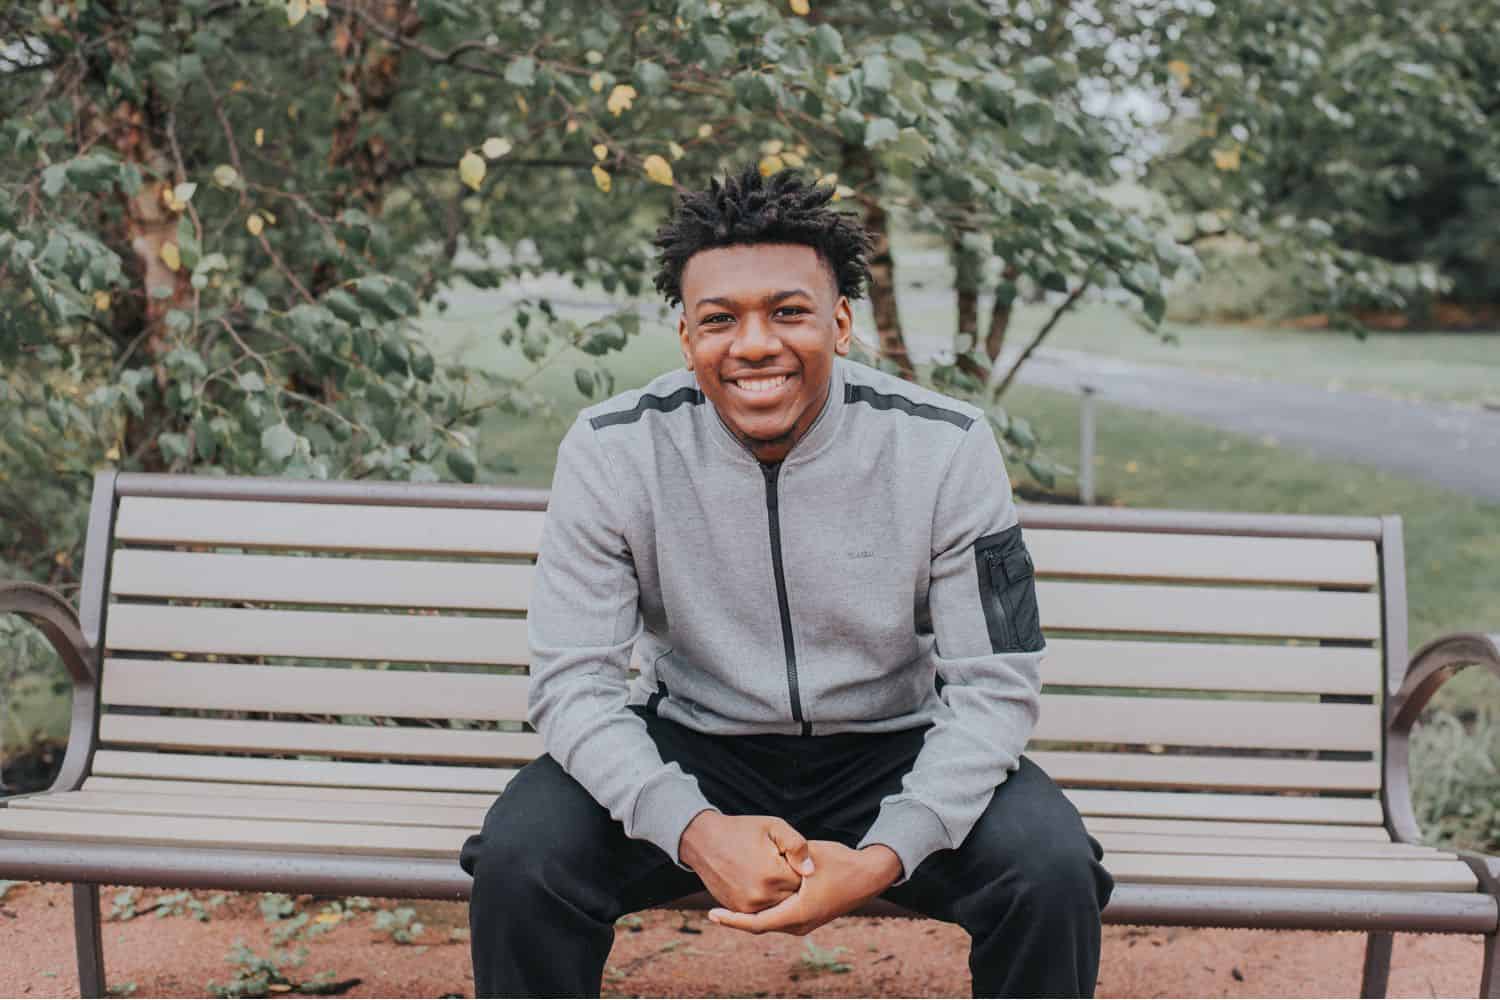 A handsome Black teen sits on a park bench smiling at the camera